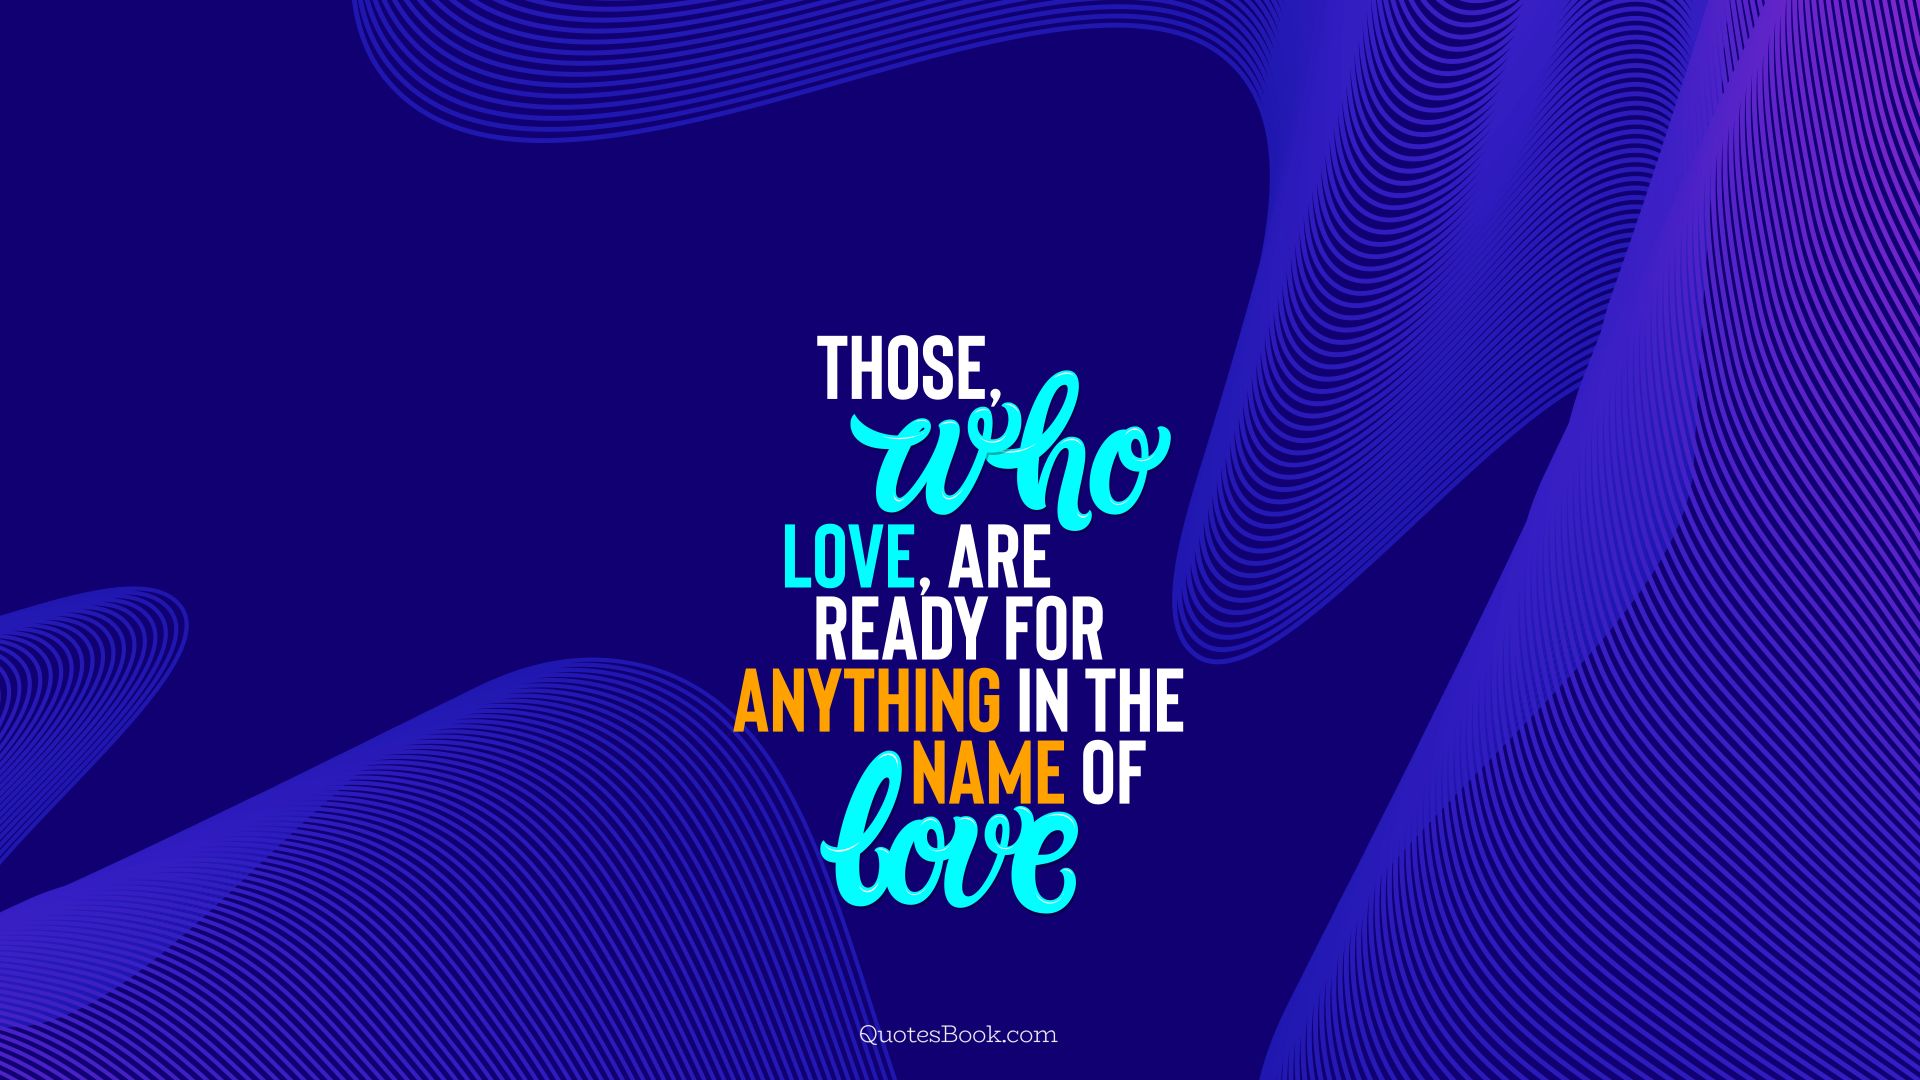 Those, who love, are ready for anything in the name of love. - Quote by QuotesBook